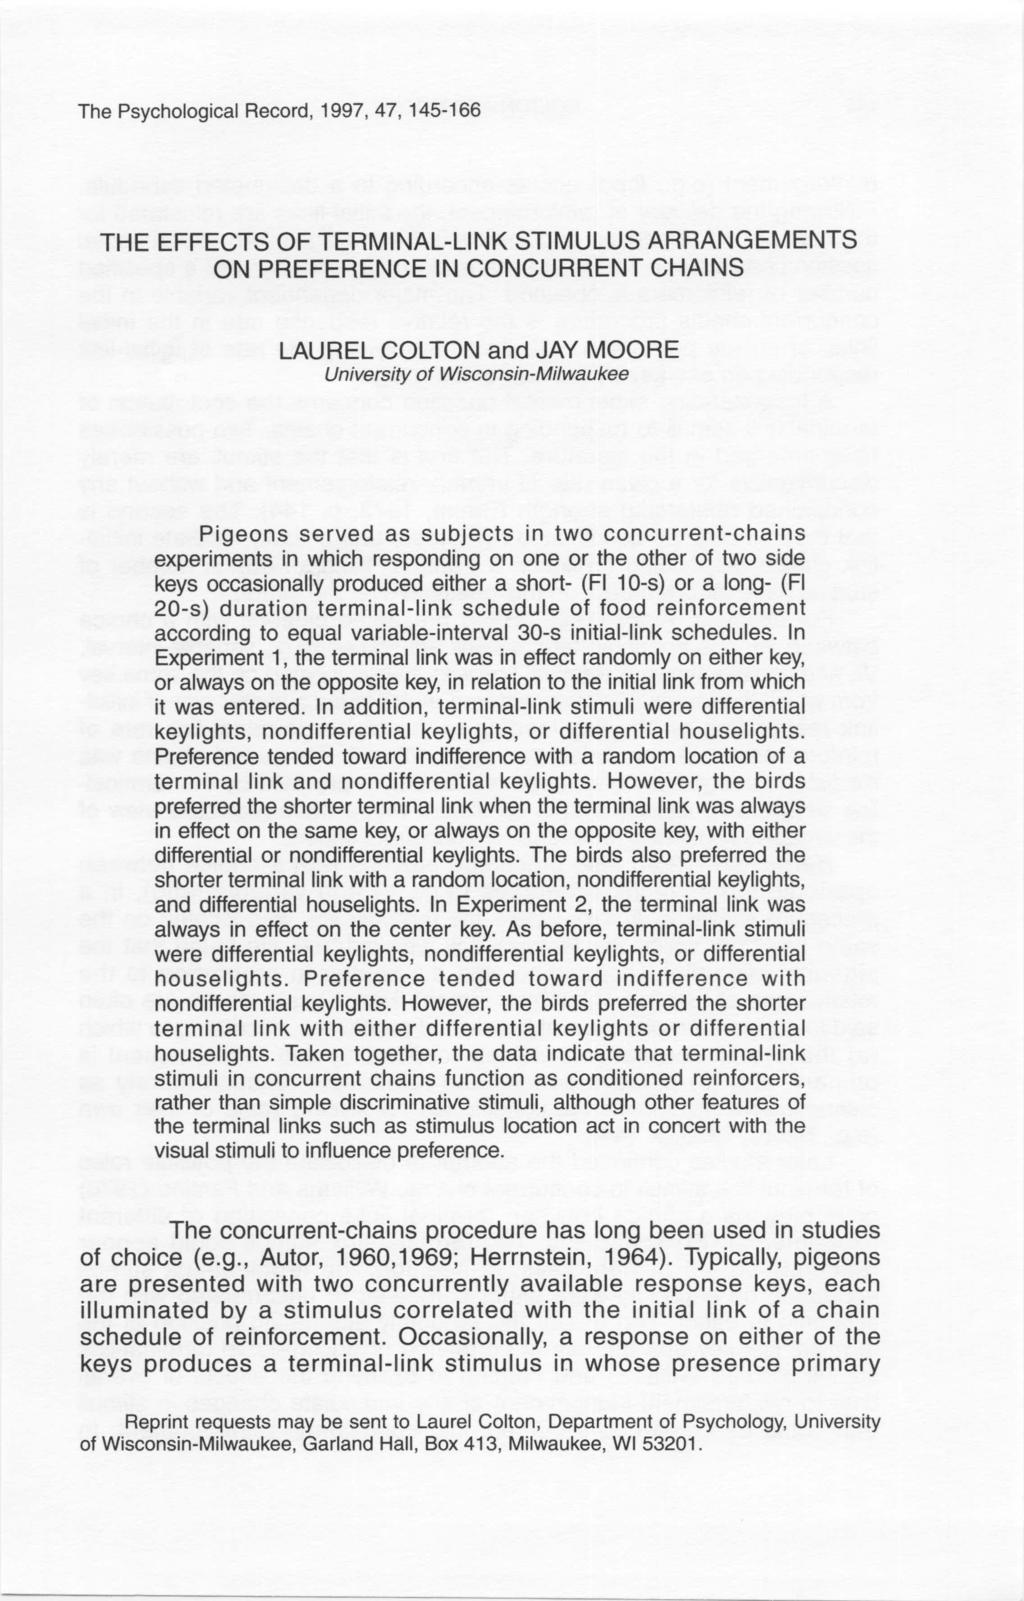 The Psychological Record, 1997,47,145-166 THE EFFECTS OF TERMINAL-LINK STIMULUS ARRANGEMENTS ON PREFERENCE IN CONCURRENT CHAINS LAUREL COLTON and JAY MOORE University of Wisconsin-Milwaukee Pigeons